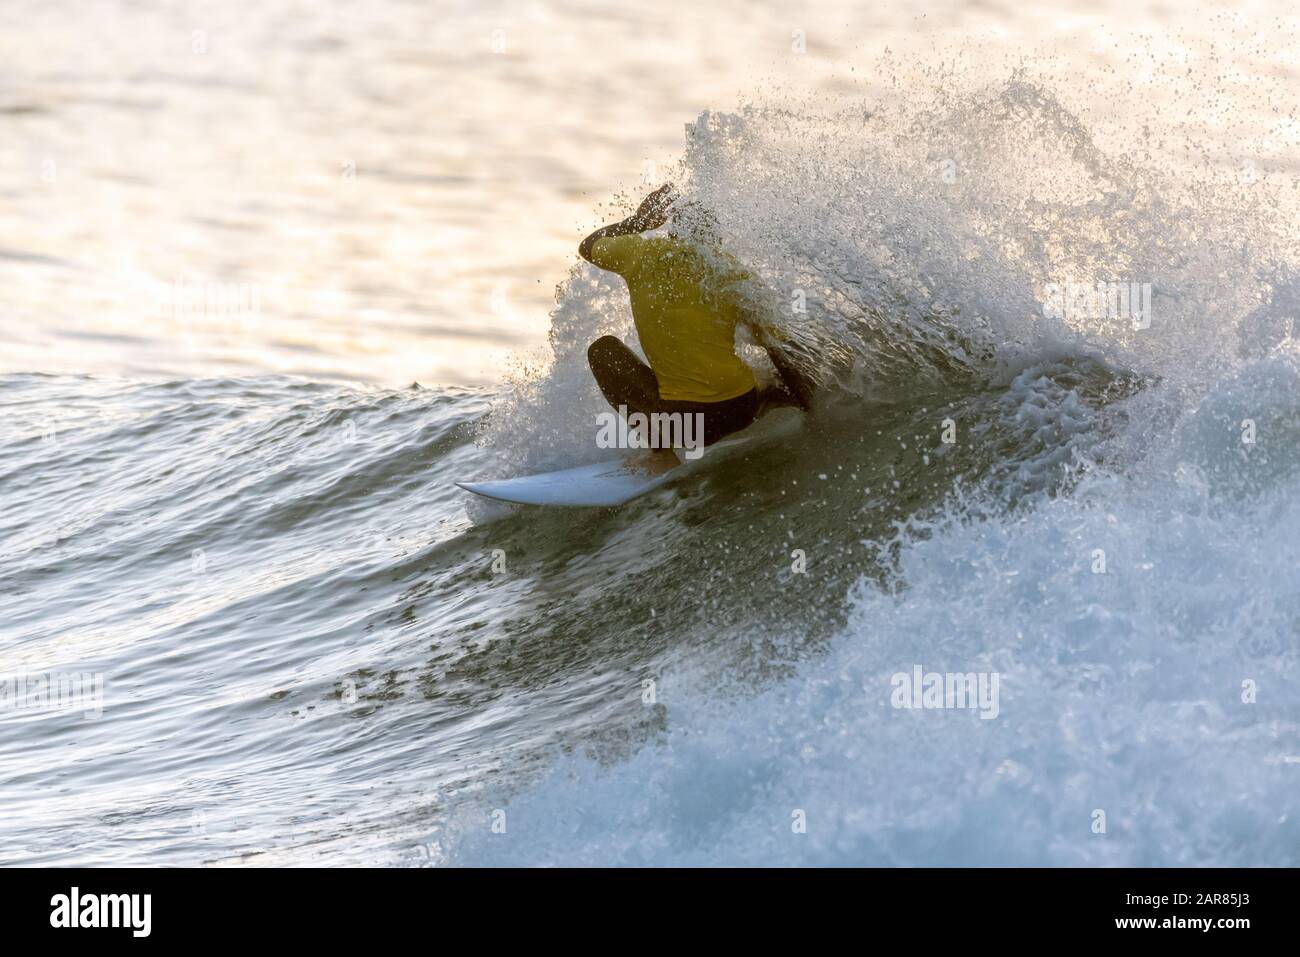 Surfer contestant in yellow jersey has head covered in white water spray while riding an ocean wave. Stock Photo